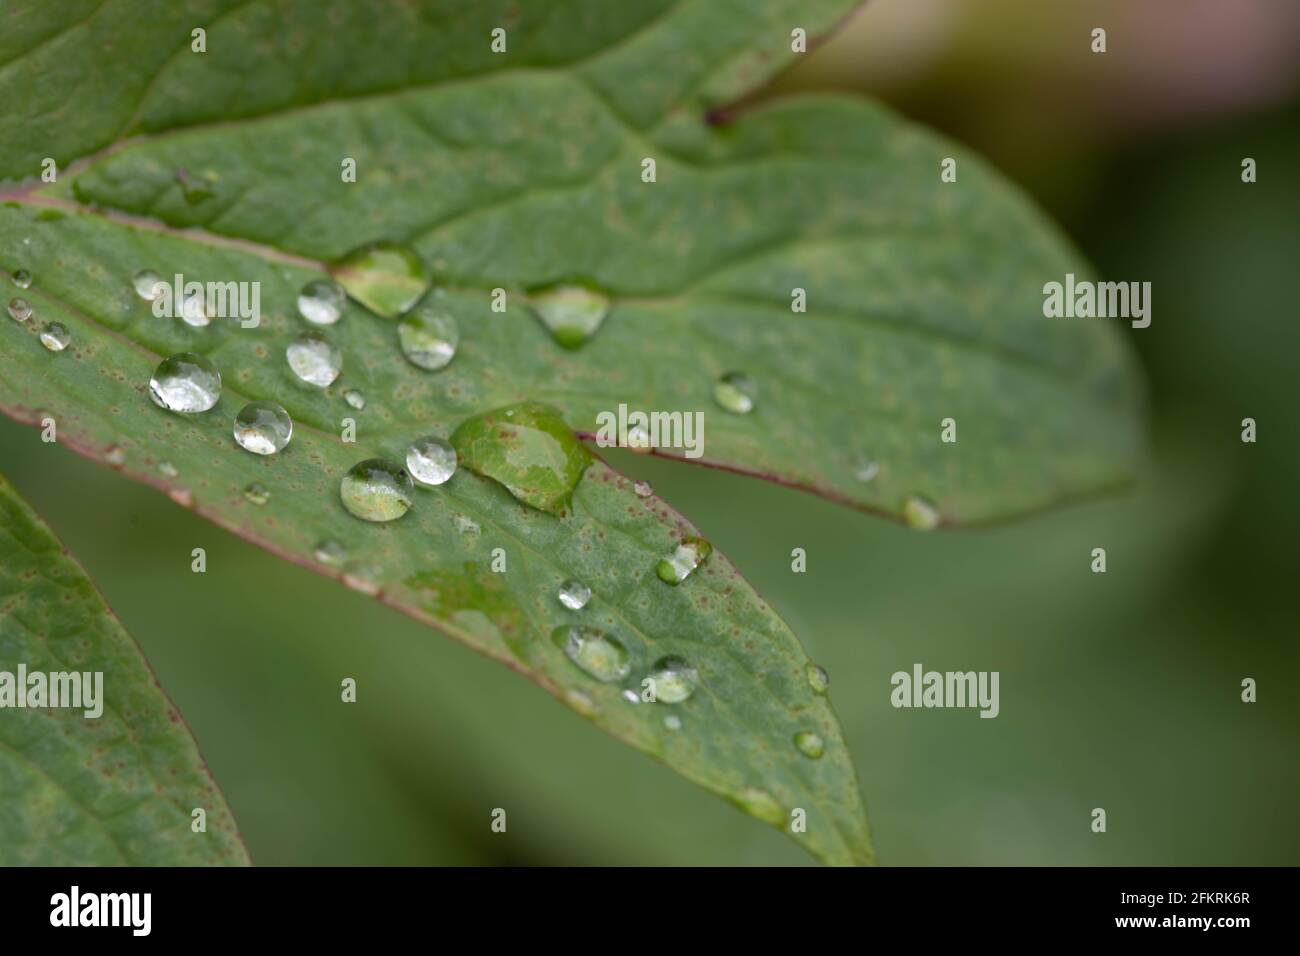 Close up of drops on green leaves in sunny garden. Stock Photo